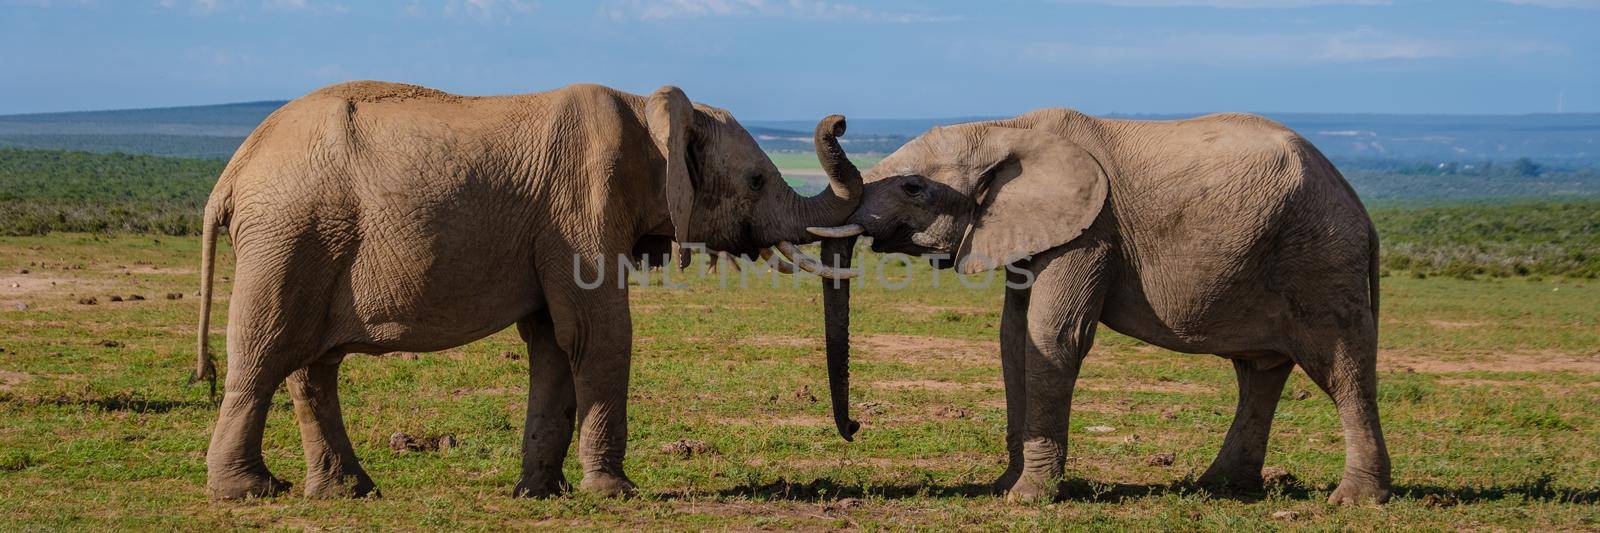 Elephants in South Africa, Family of elephant in Addo elephant park by fokkebok